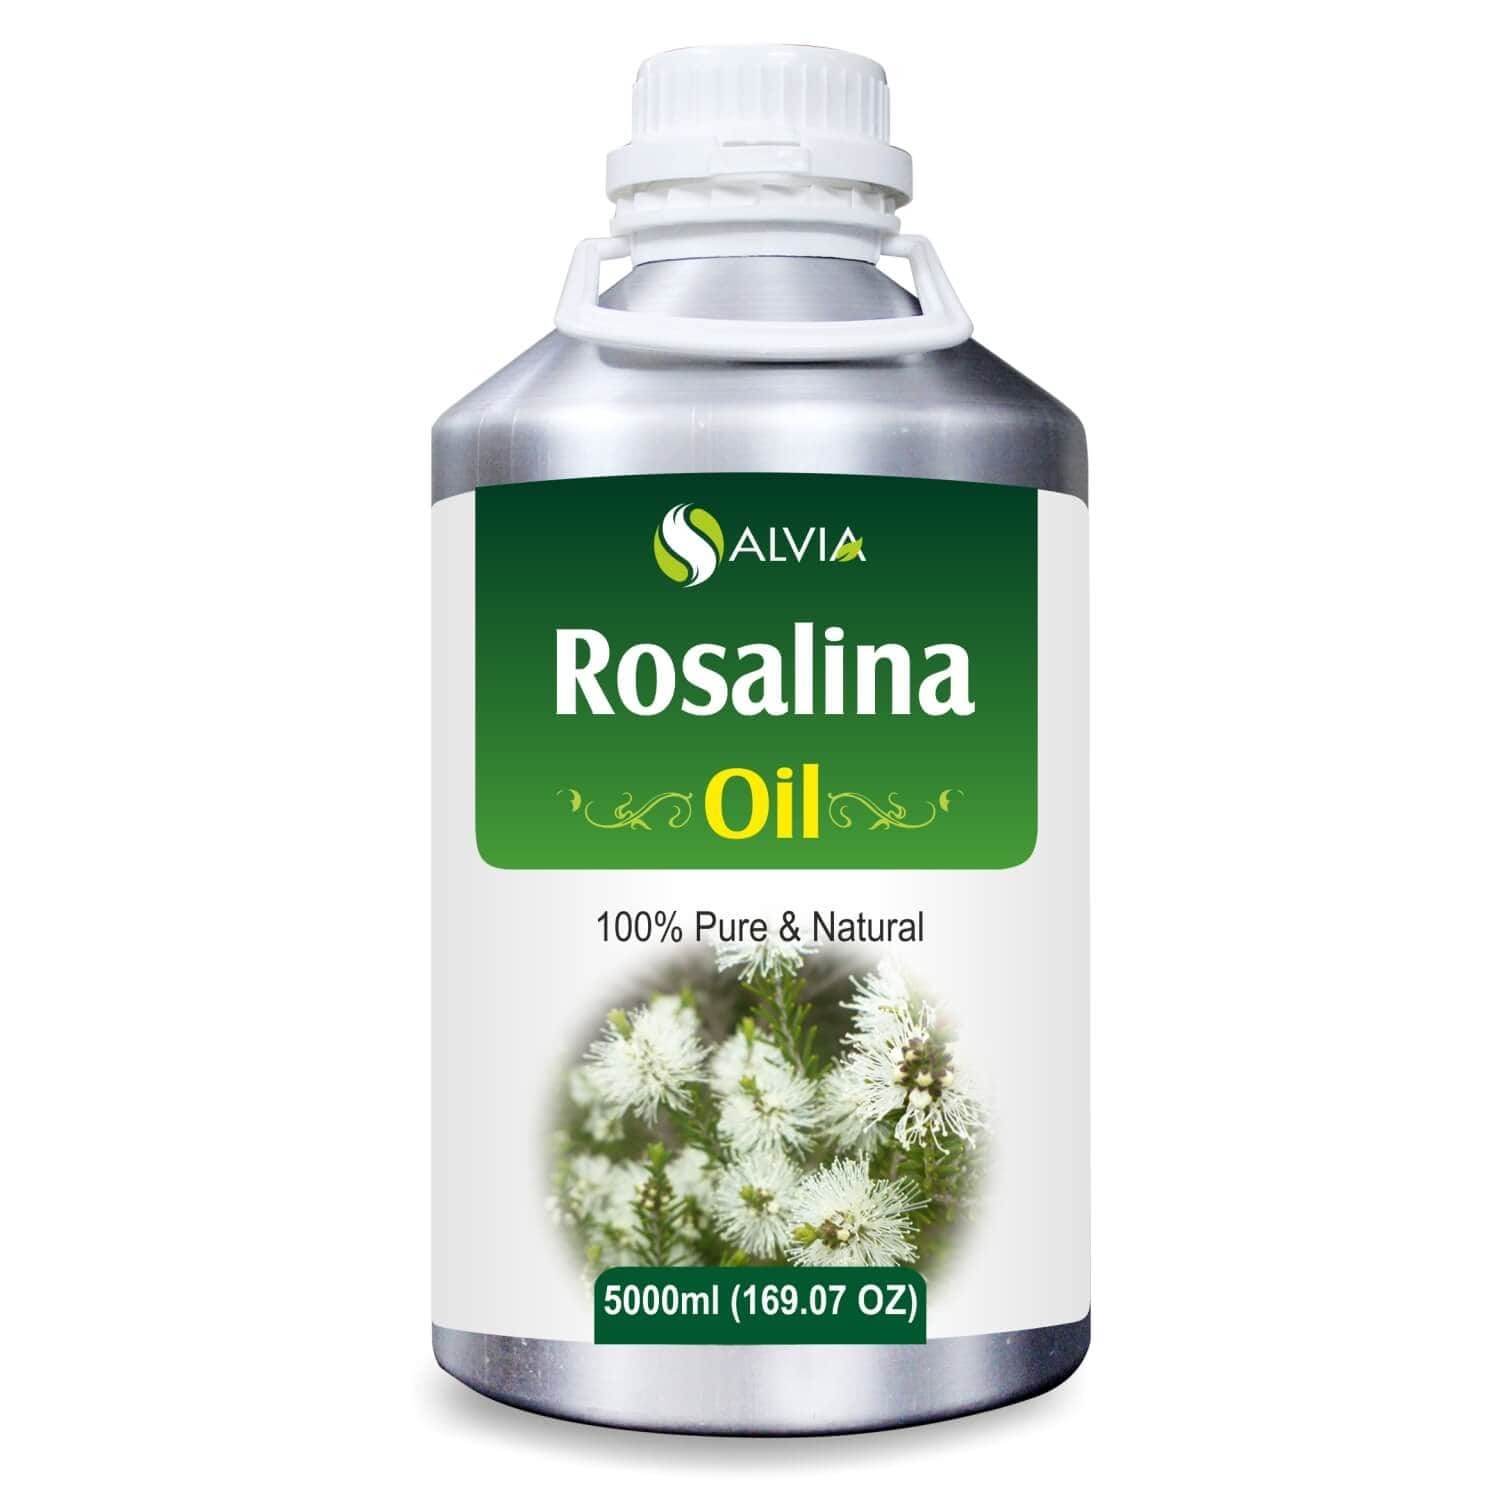 Salvia Natural Essential Oils 5000ml Rosalina Oil (Melaleuca Ericifolia) Natural Essential Oil Reduces Cold & Congestion, Supports Healthy Respiratory System, Uplifts Emotion